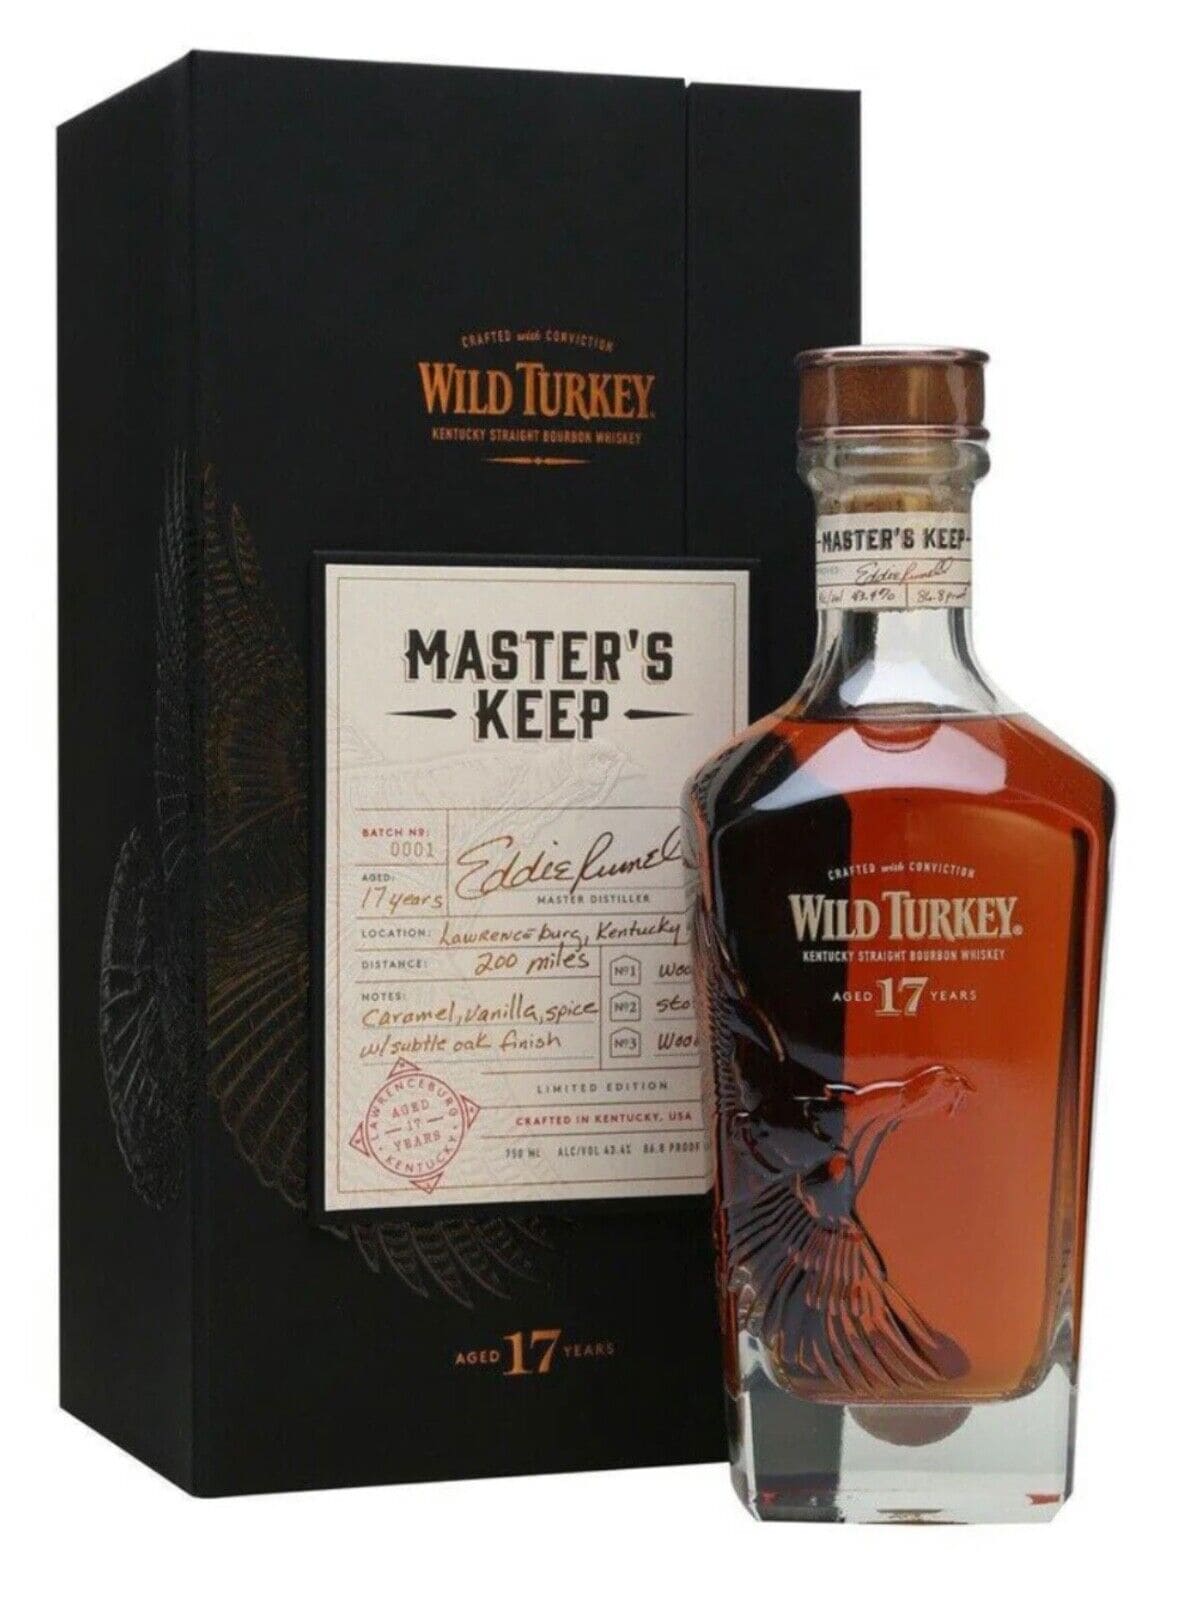 Wild Turkey Masters Keep 17 Year Old 750ml Limited Edition 1st release